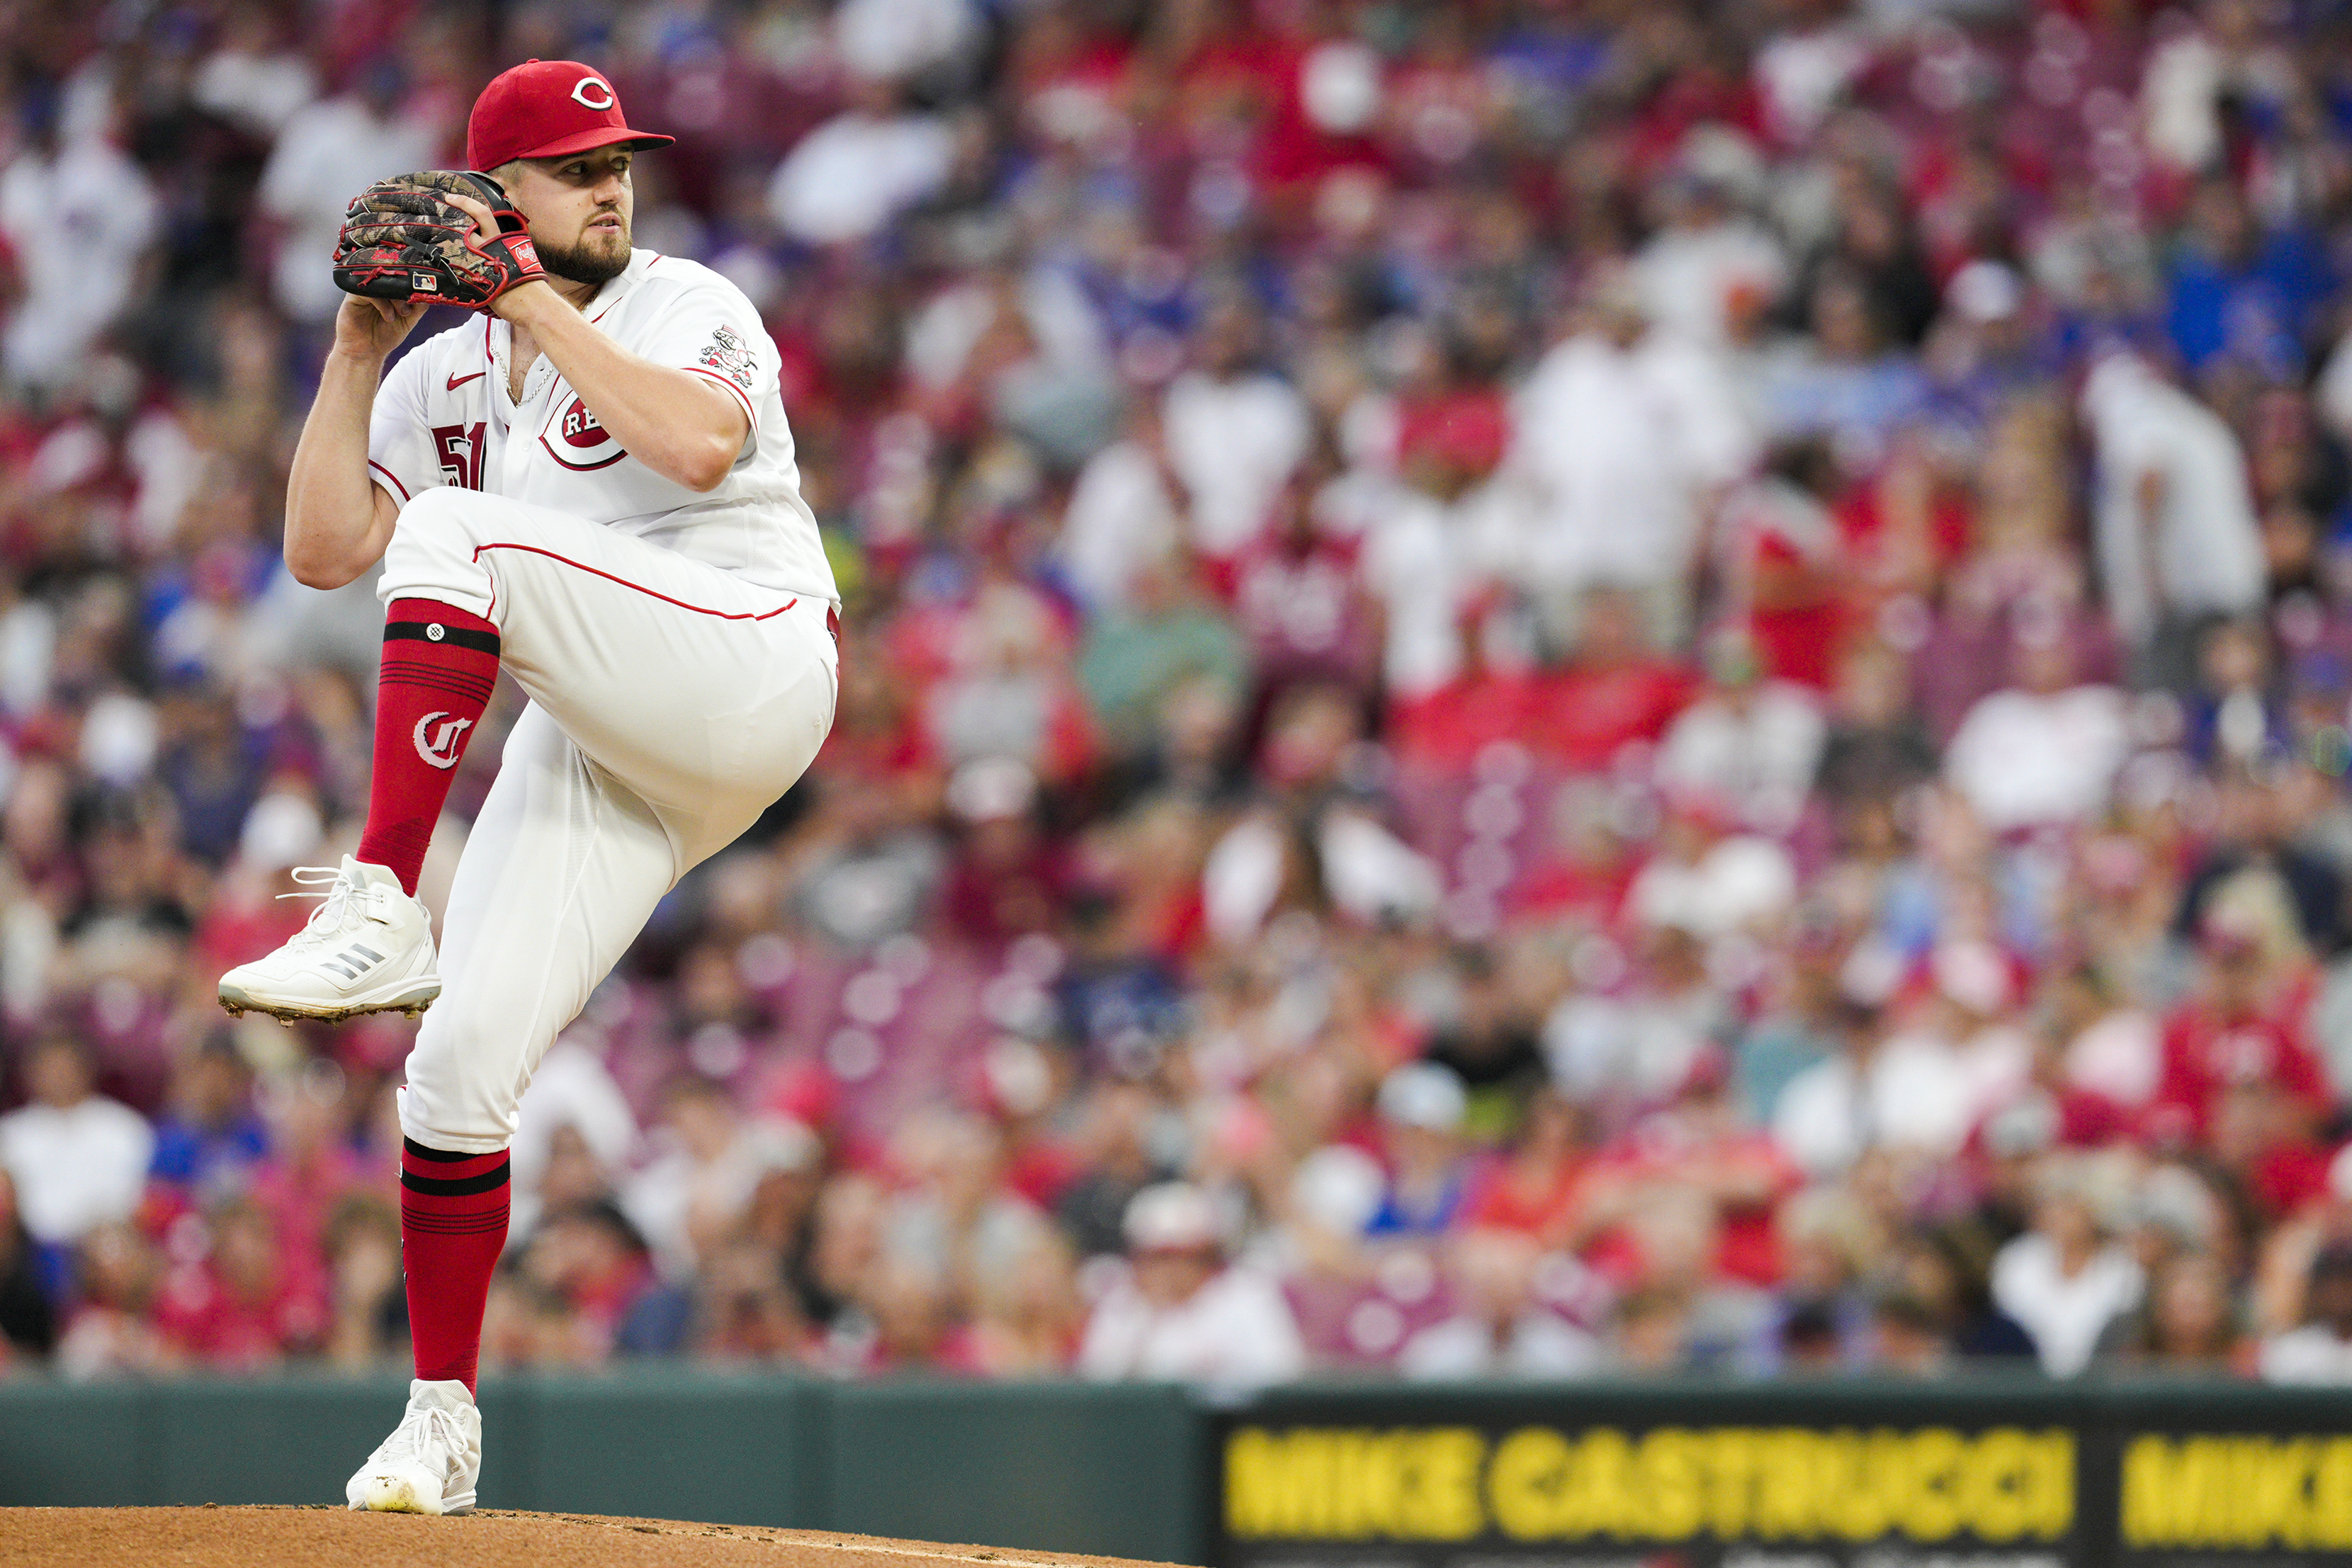 Do the Reds have multiple aces in their starting rotation?